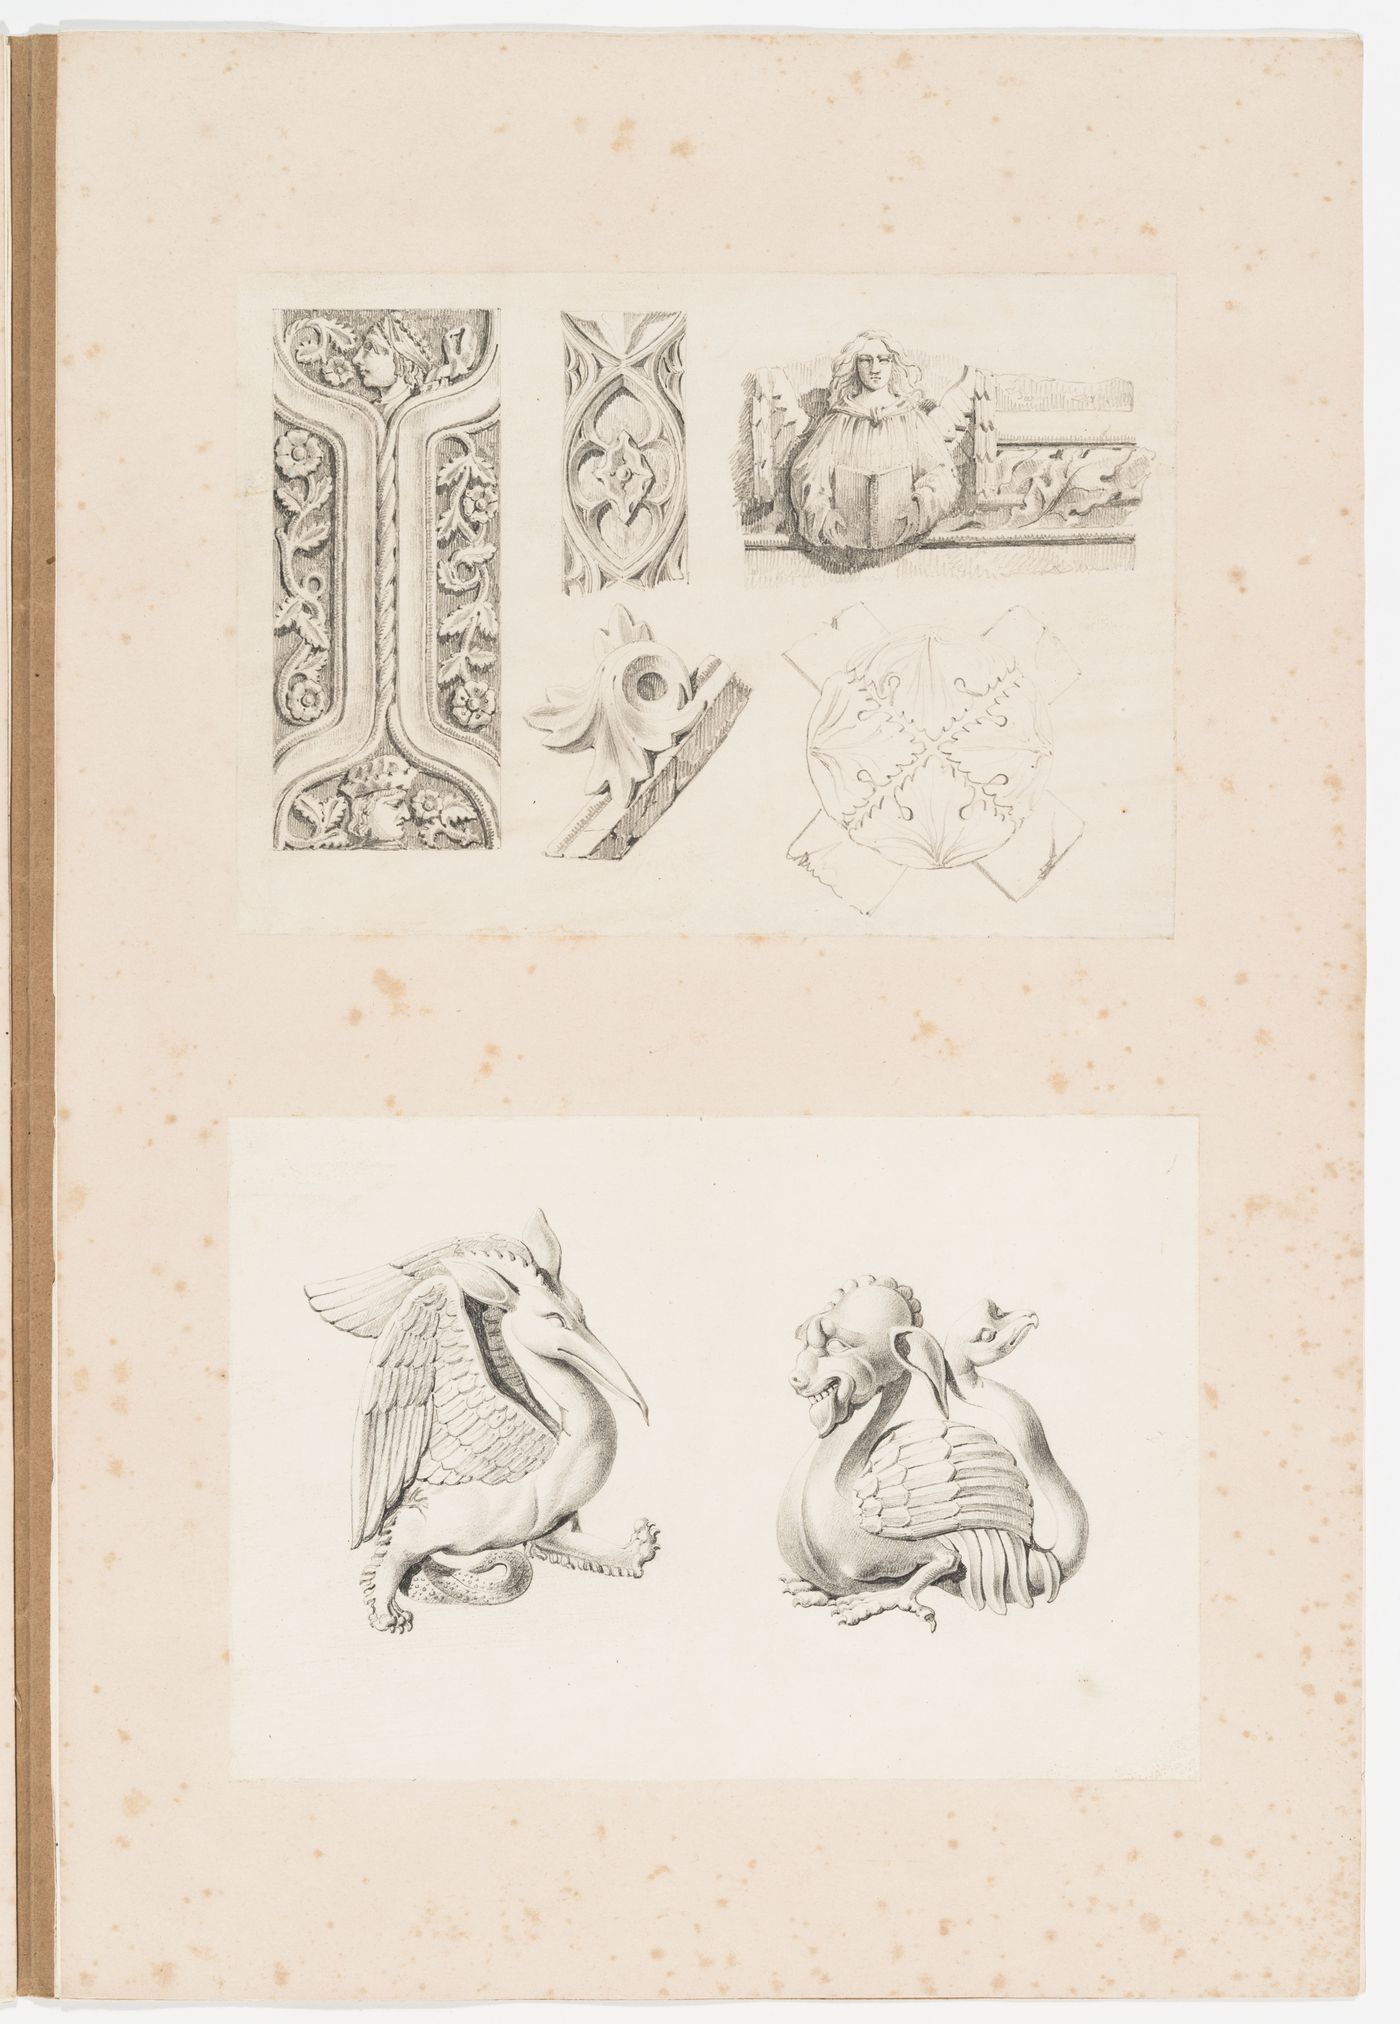 Two drawings of Gothic ornament copied from 'Pugin's Gothic Ornament', showing details from Beddington Place, Beddington, the Abbaye de Saint-Amand and Cathédrale Notre-Dame, Rouen, Church of Saint Mary the Virgin, Oxford, and Eltham Palace, Greenwich